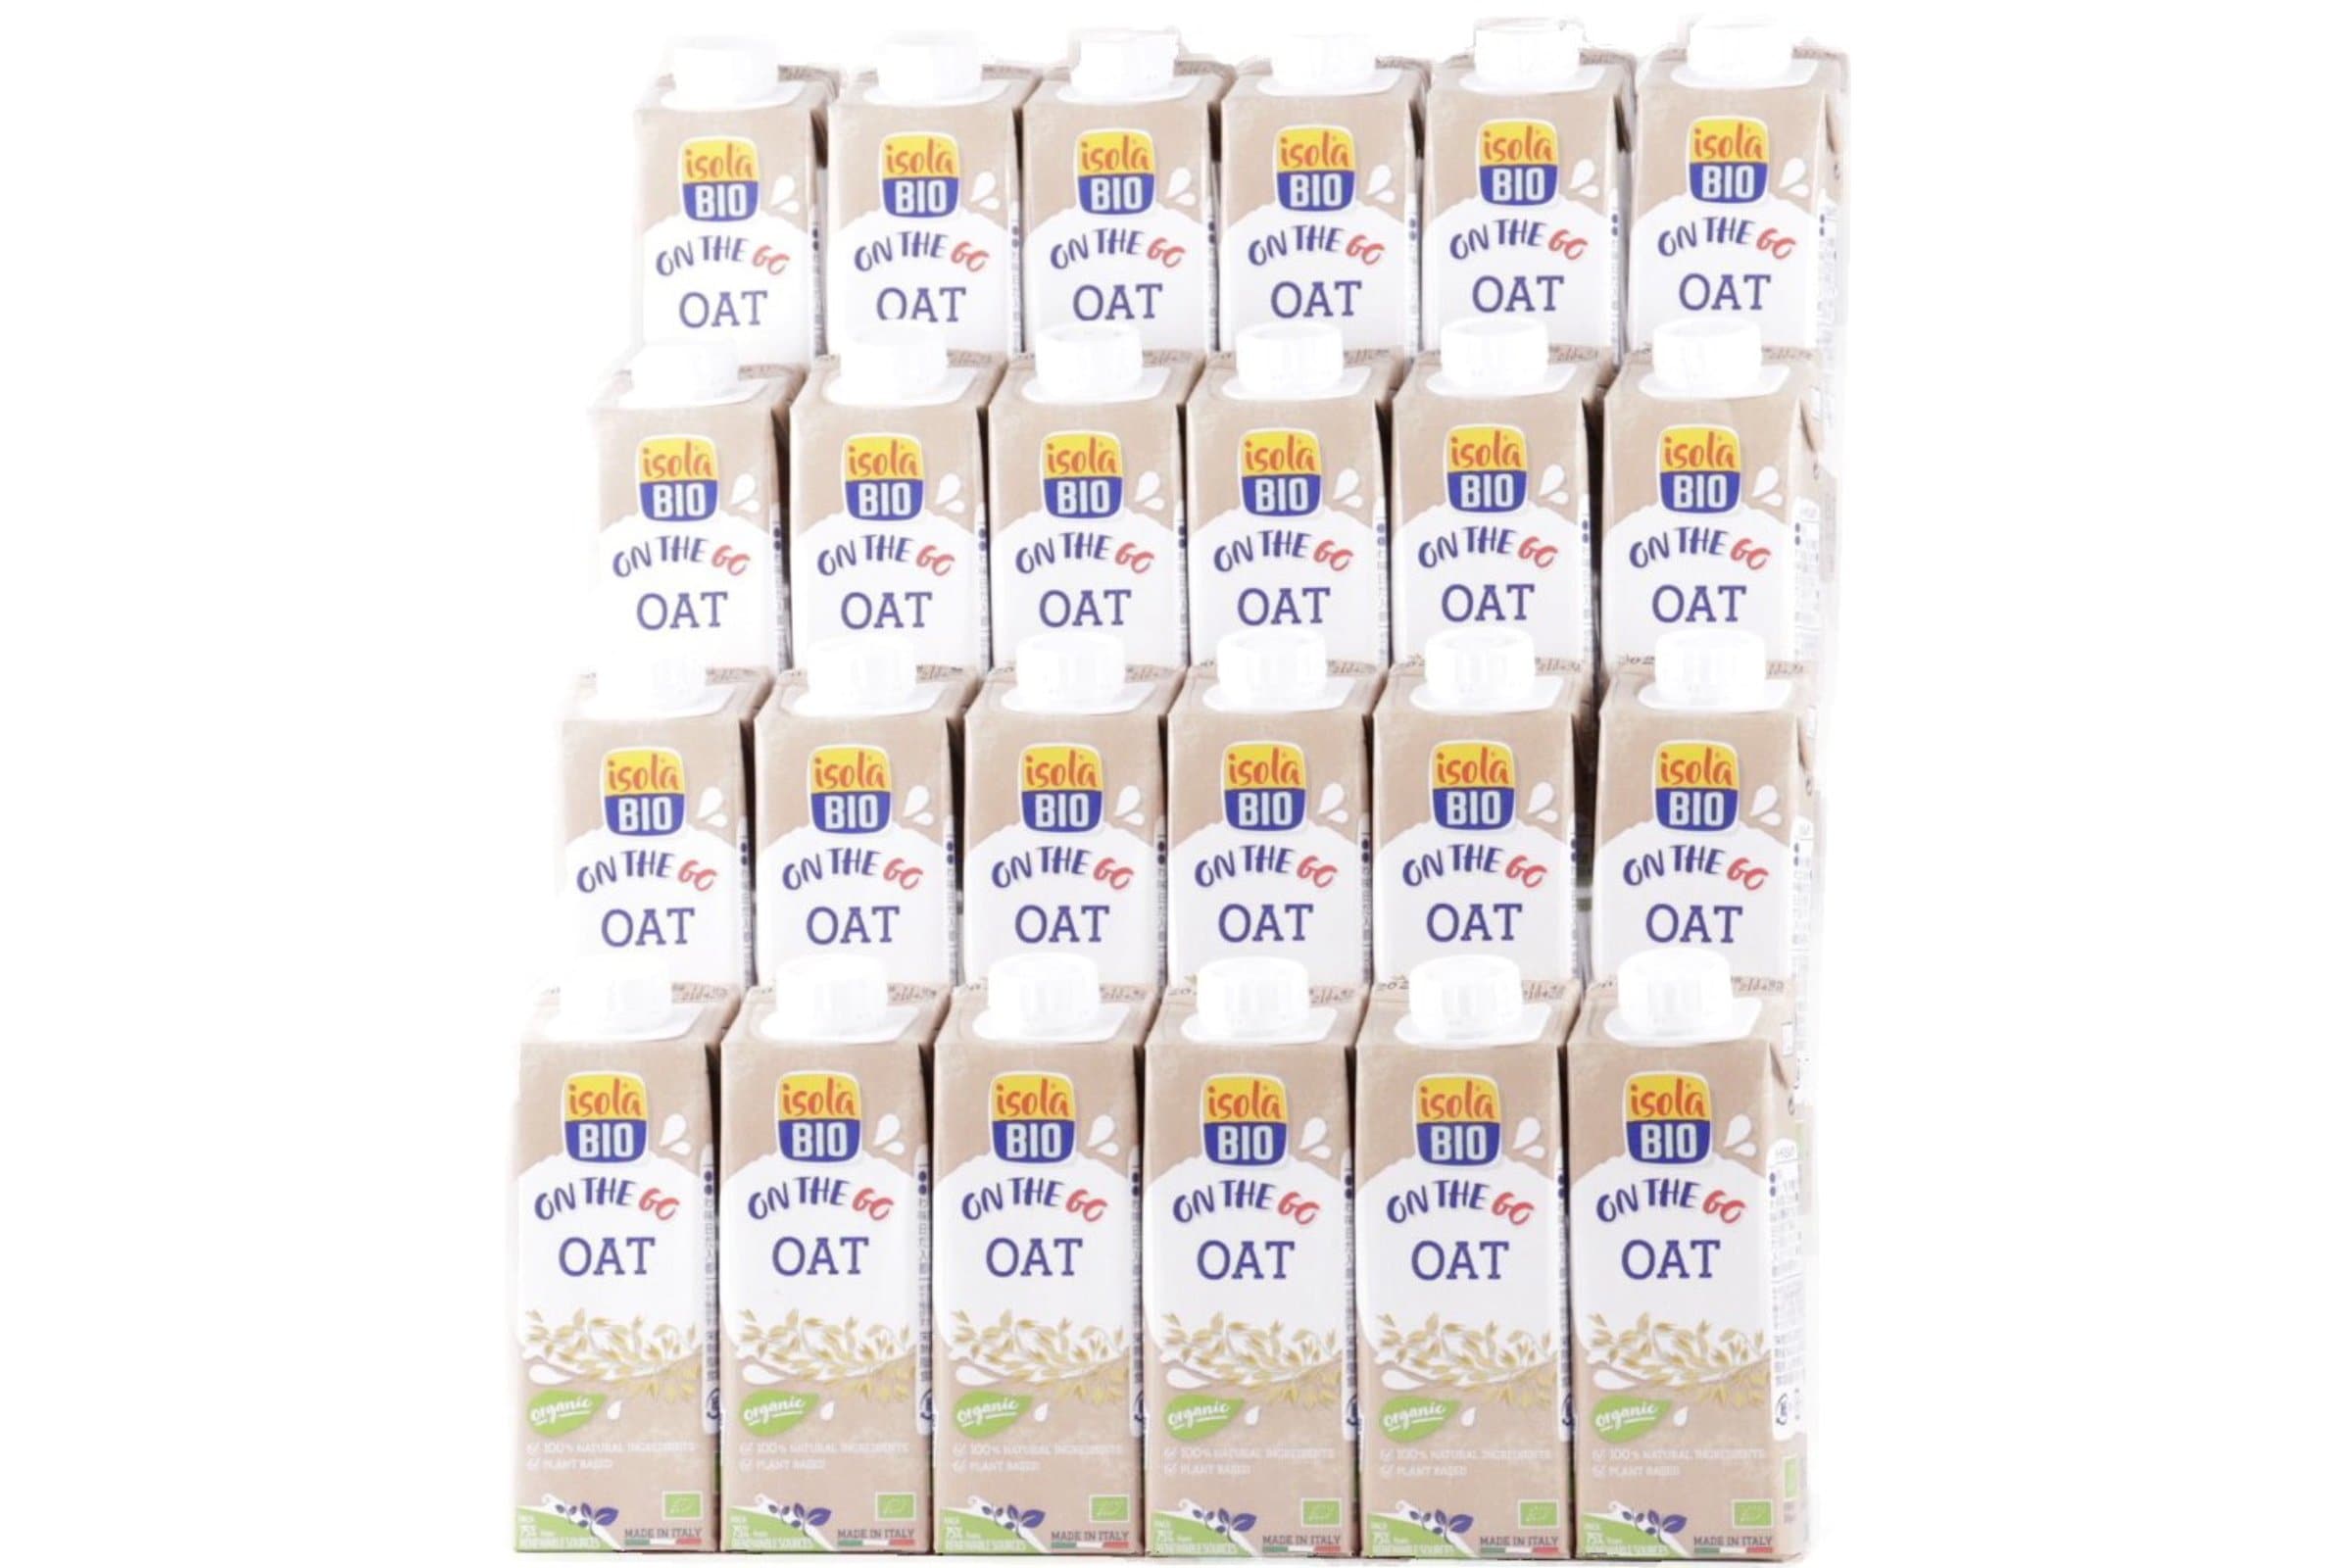 ON THE GO オーツミルク 250ml／1ケース24本入り